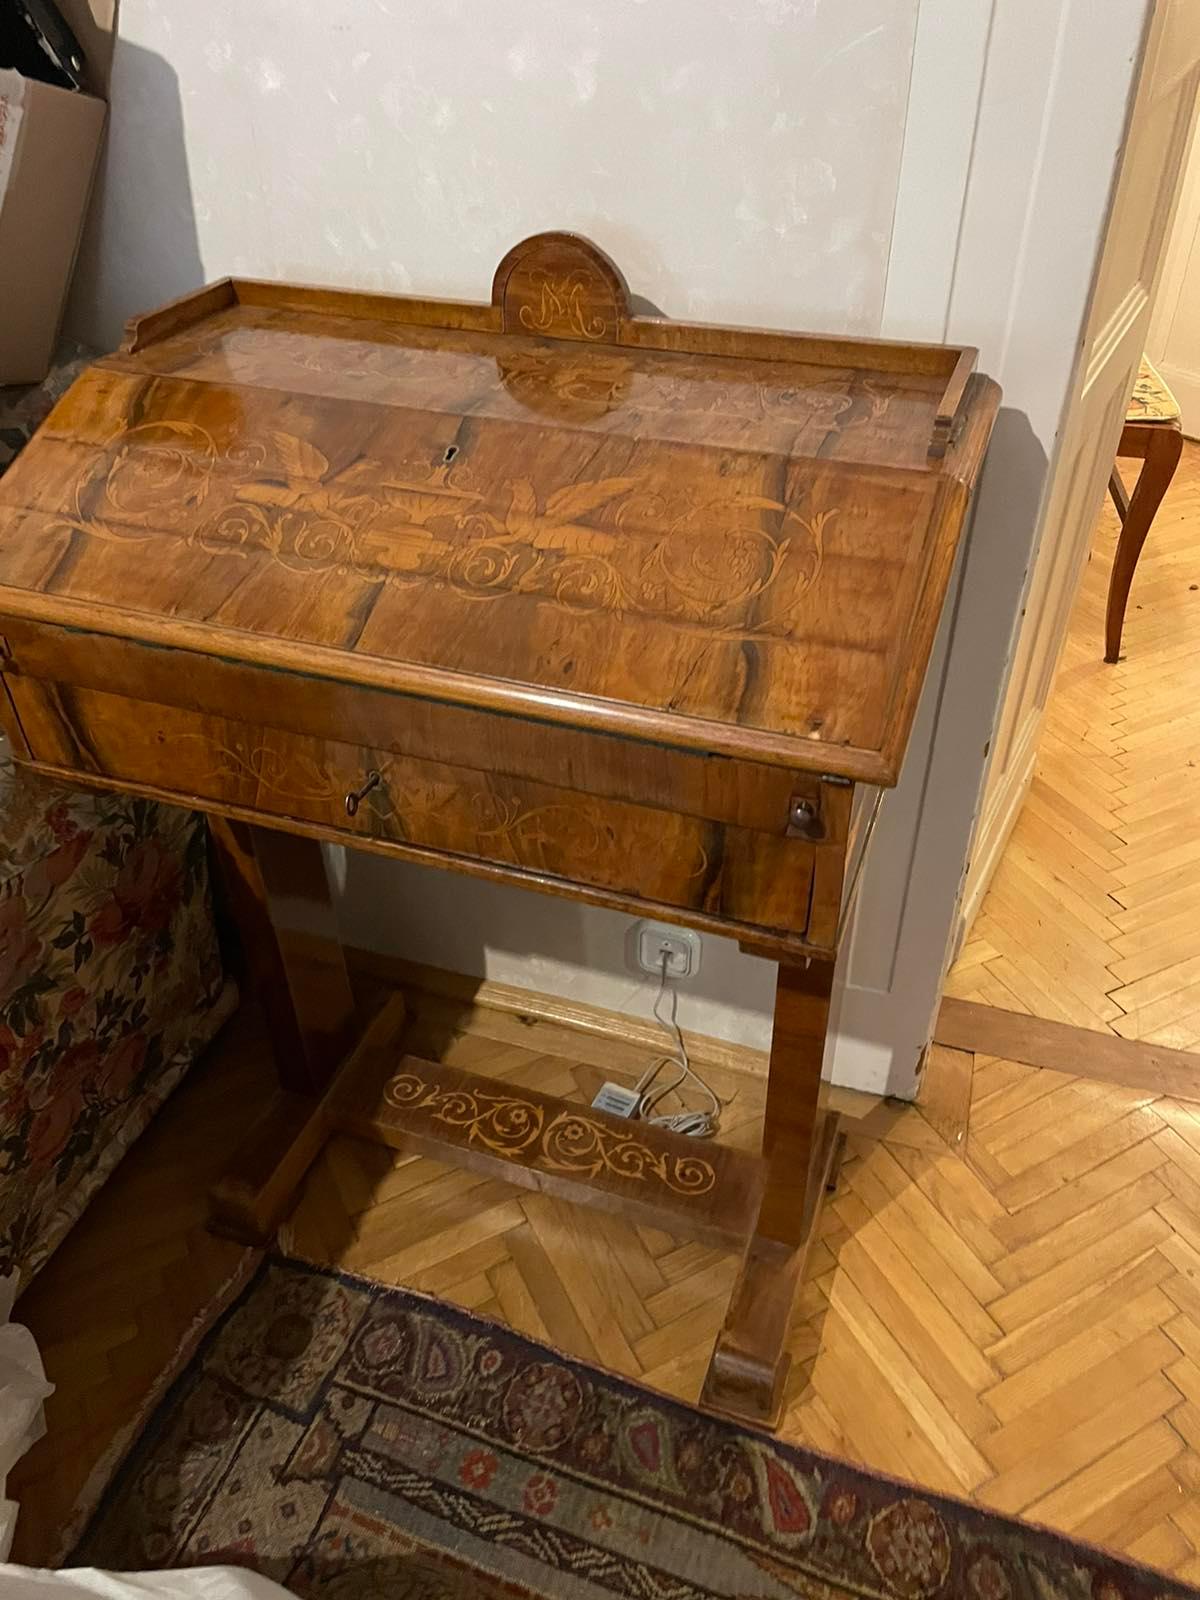 Antique Biedermeier Table, Secretaire, 19th Century In Good Condition For Sale In Kerepes, HU